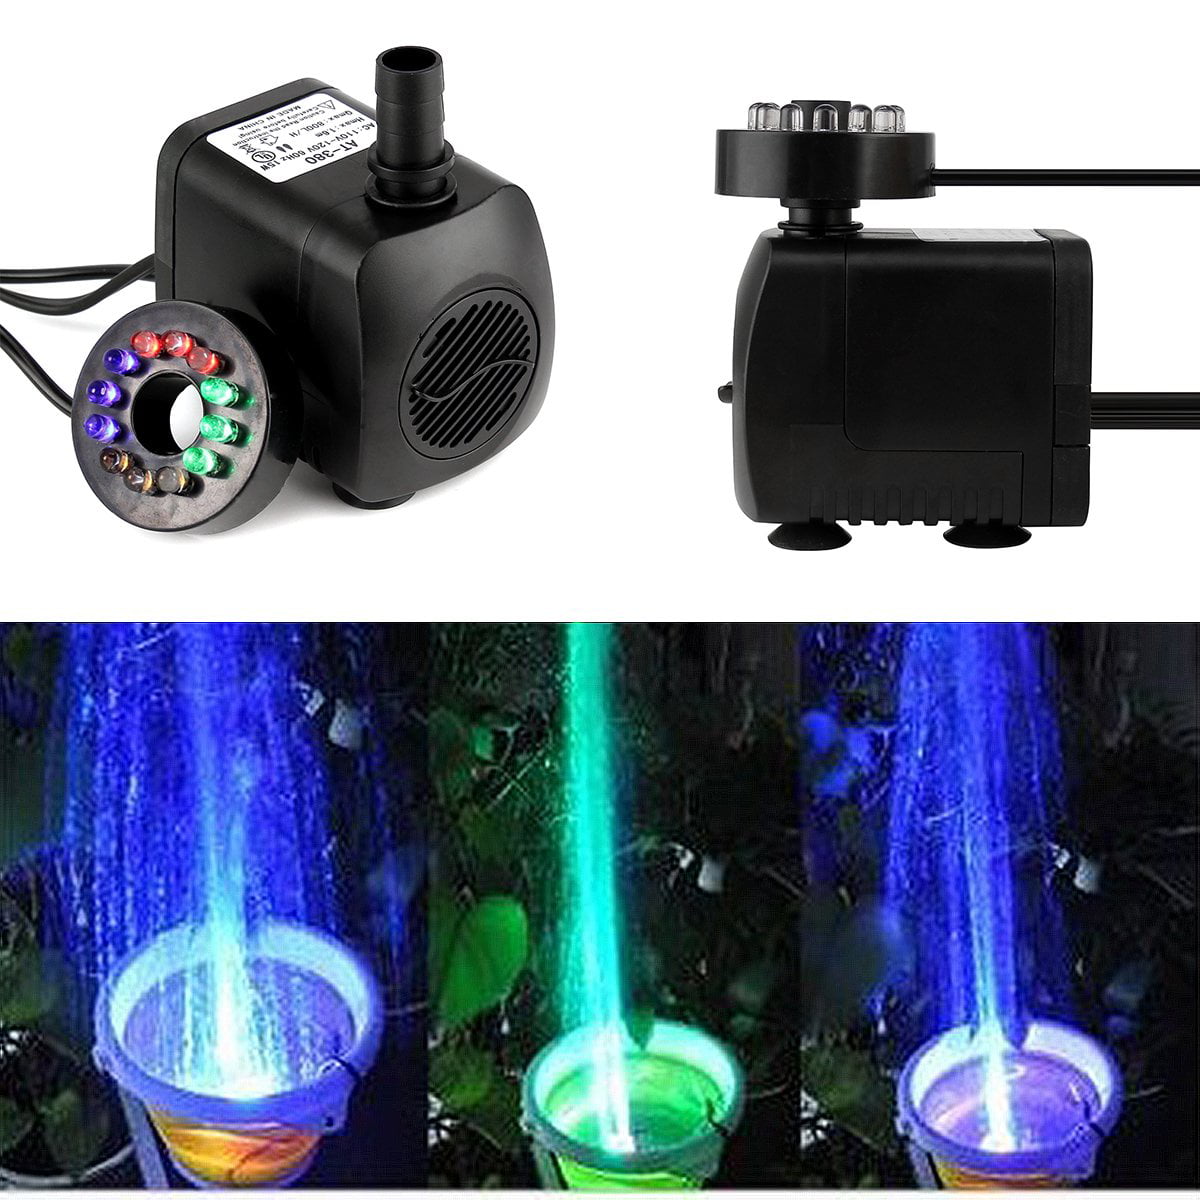 Submersible Pump Electric Fountain Water Pump 12 Led Light For Aquarium Or Pond 